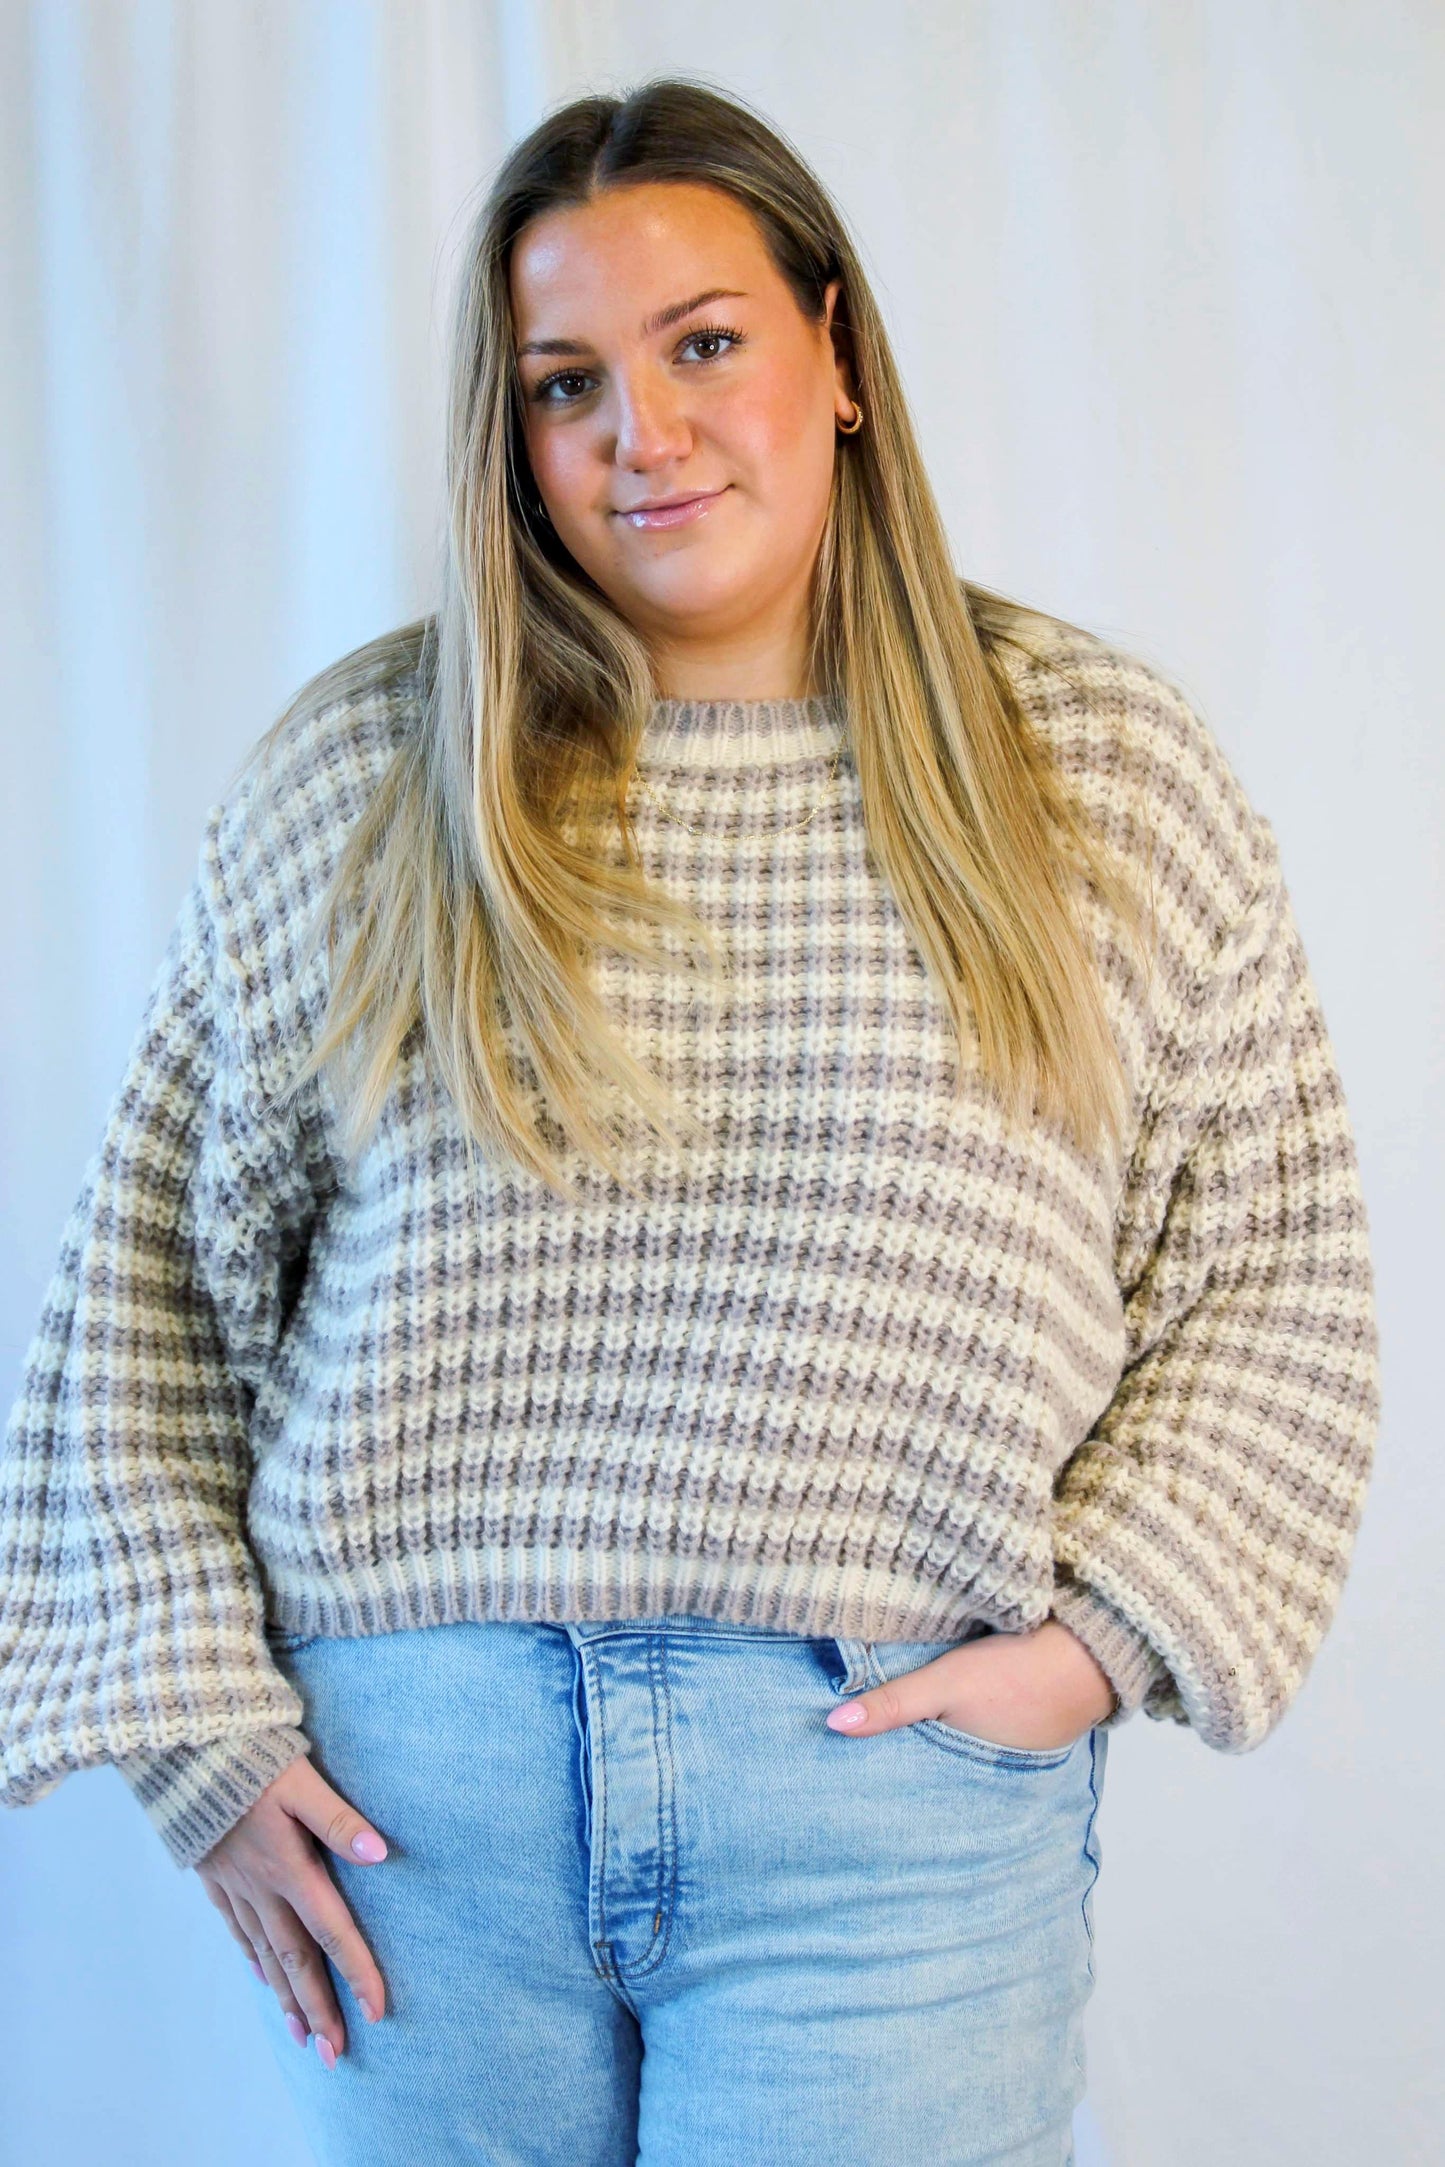 Cropped Knit Sweater